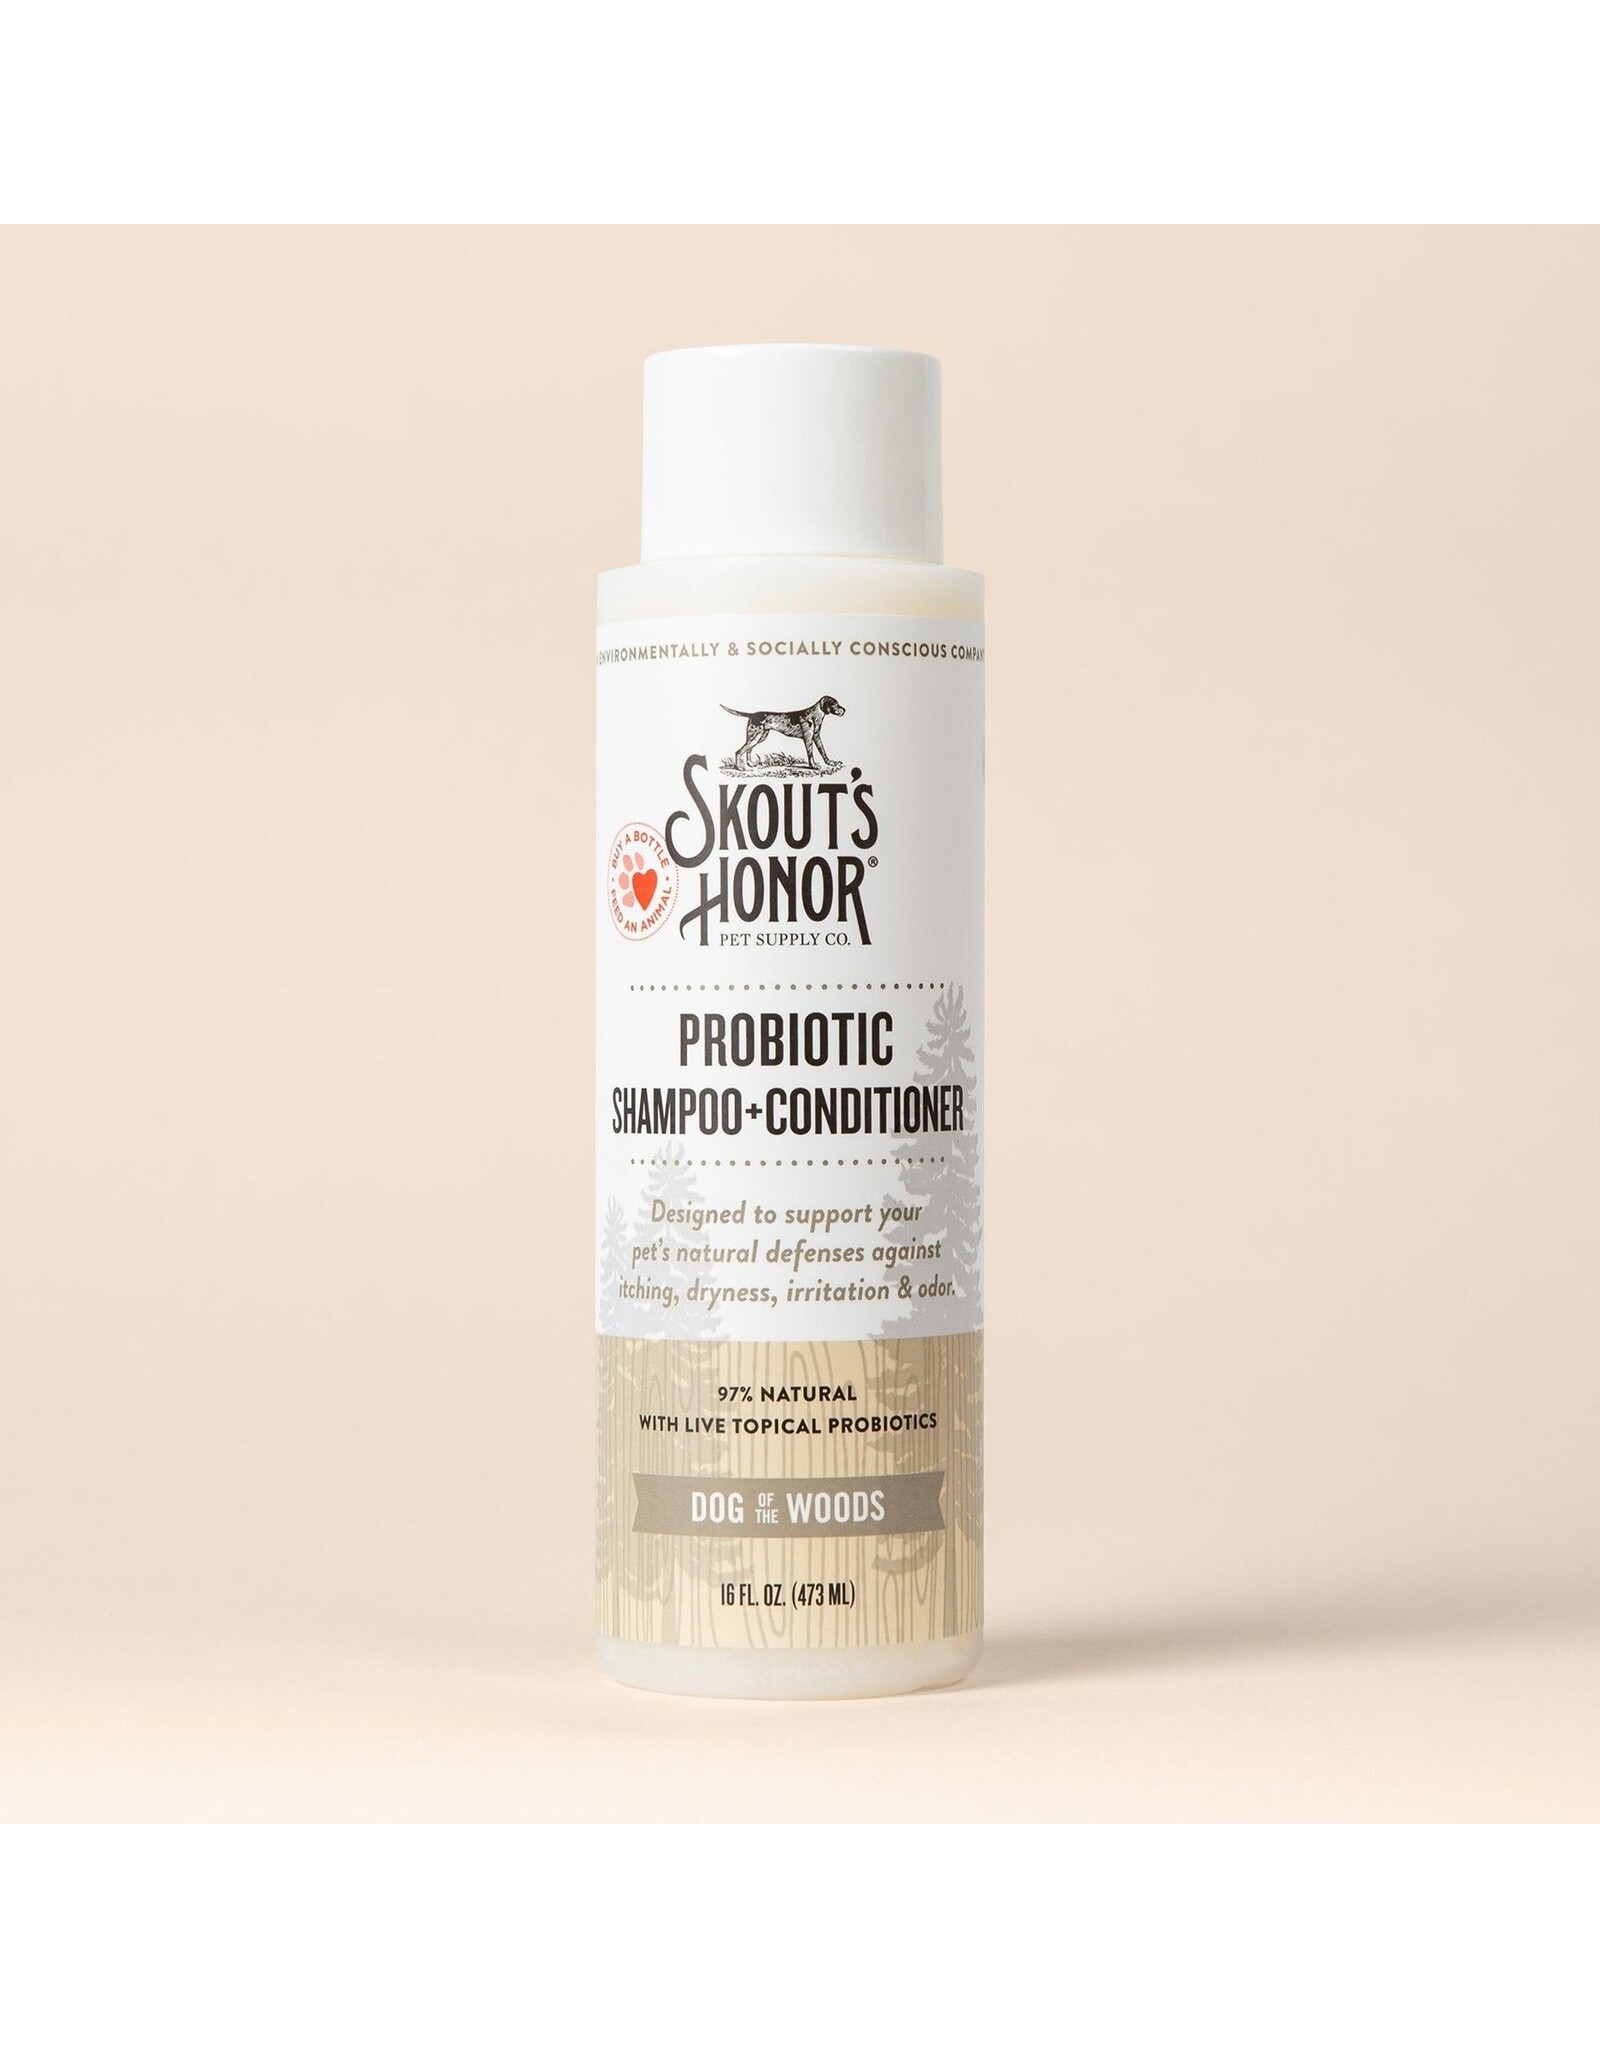 Skouts Honor Skout's Honor Dog of the Woods Shampoo + Conditioner